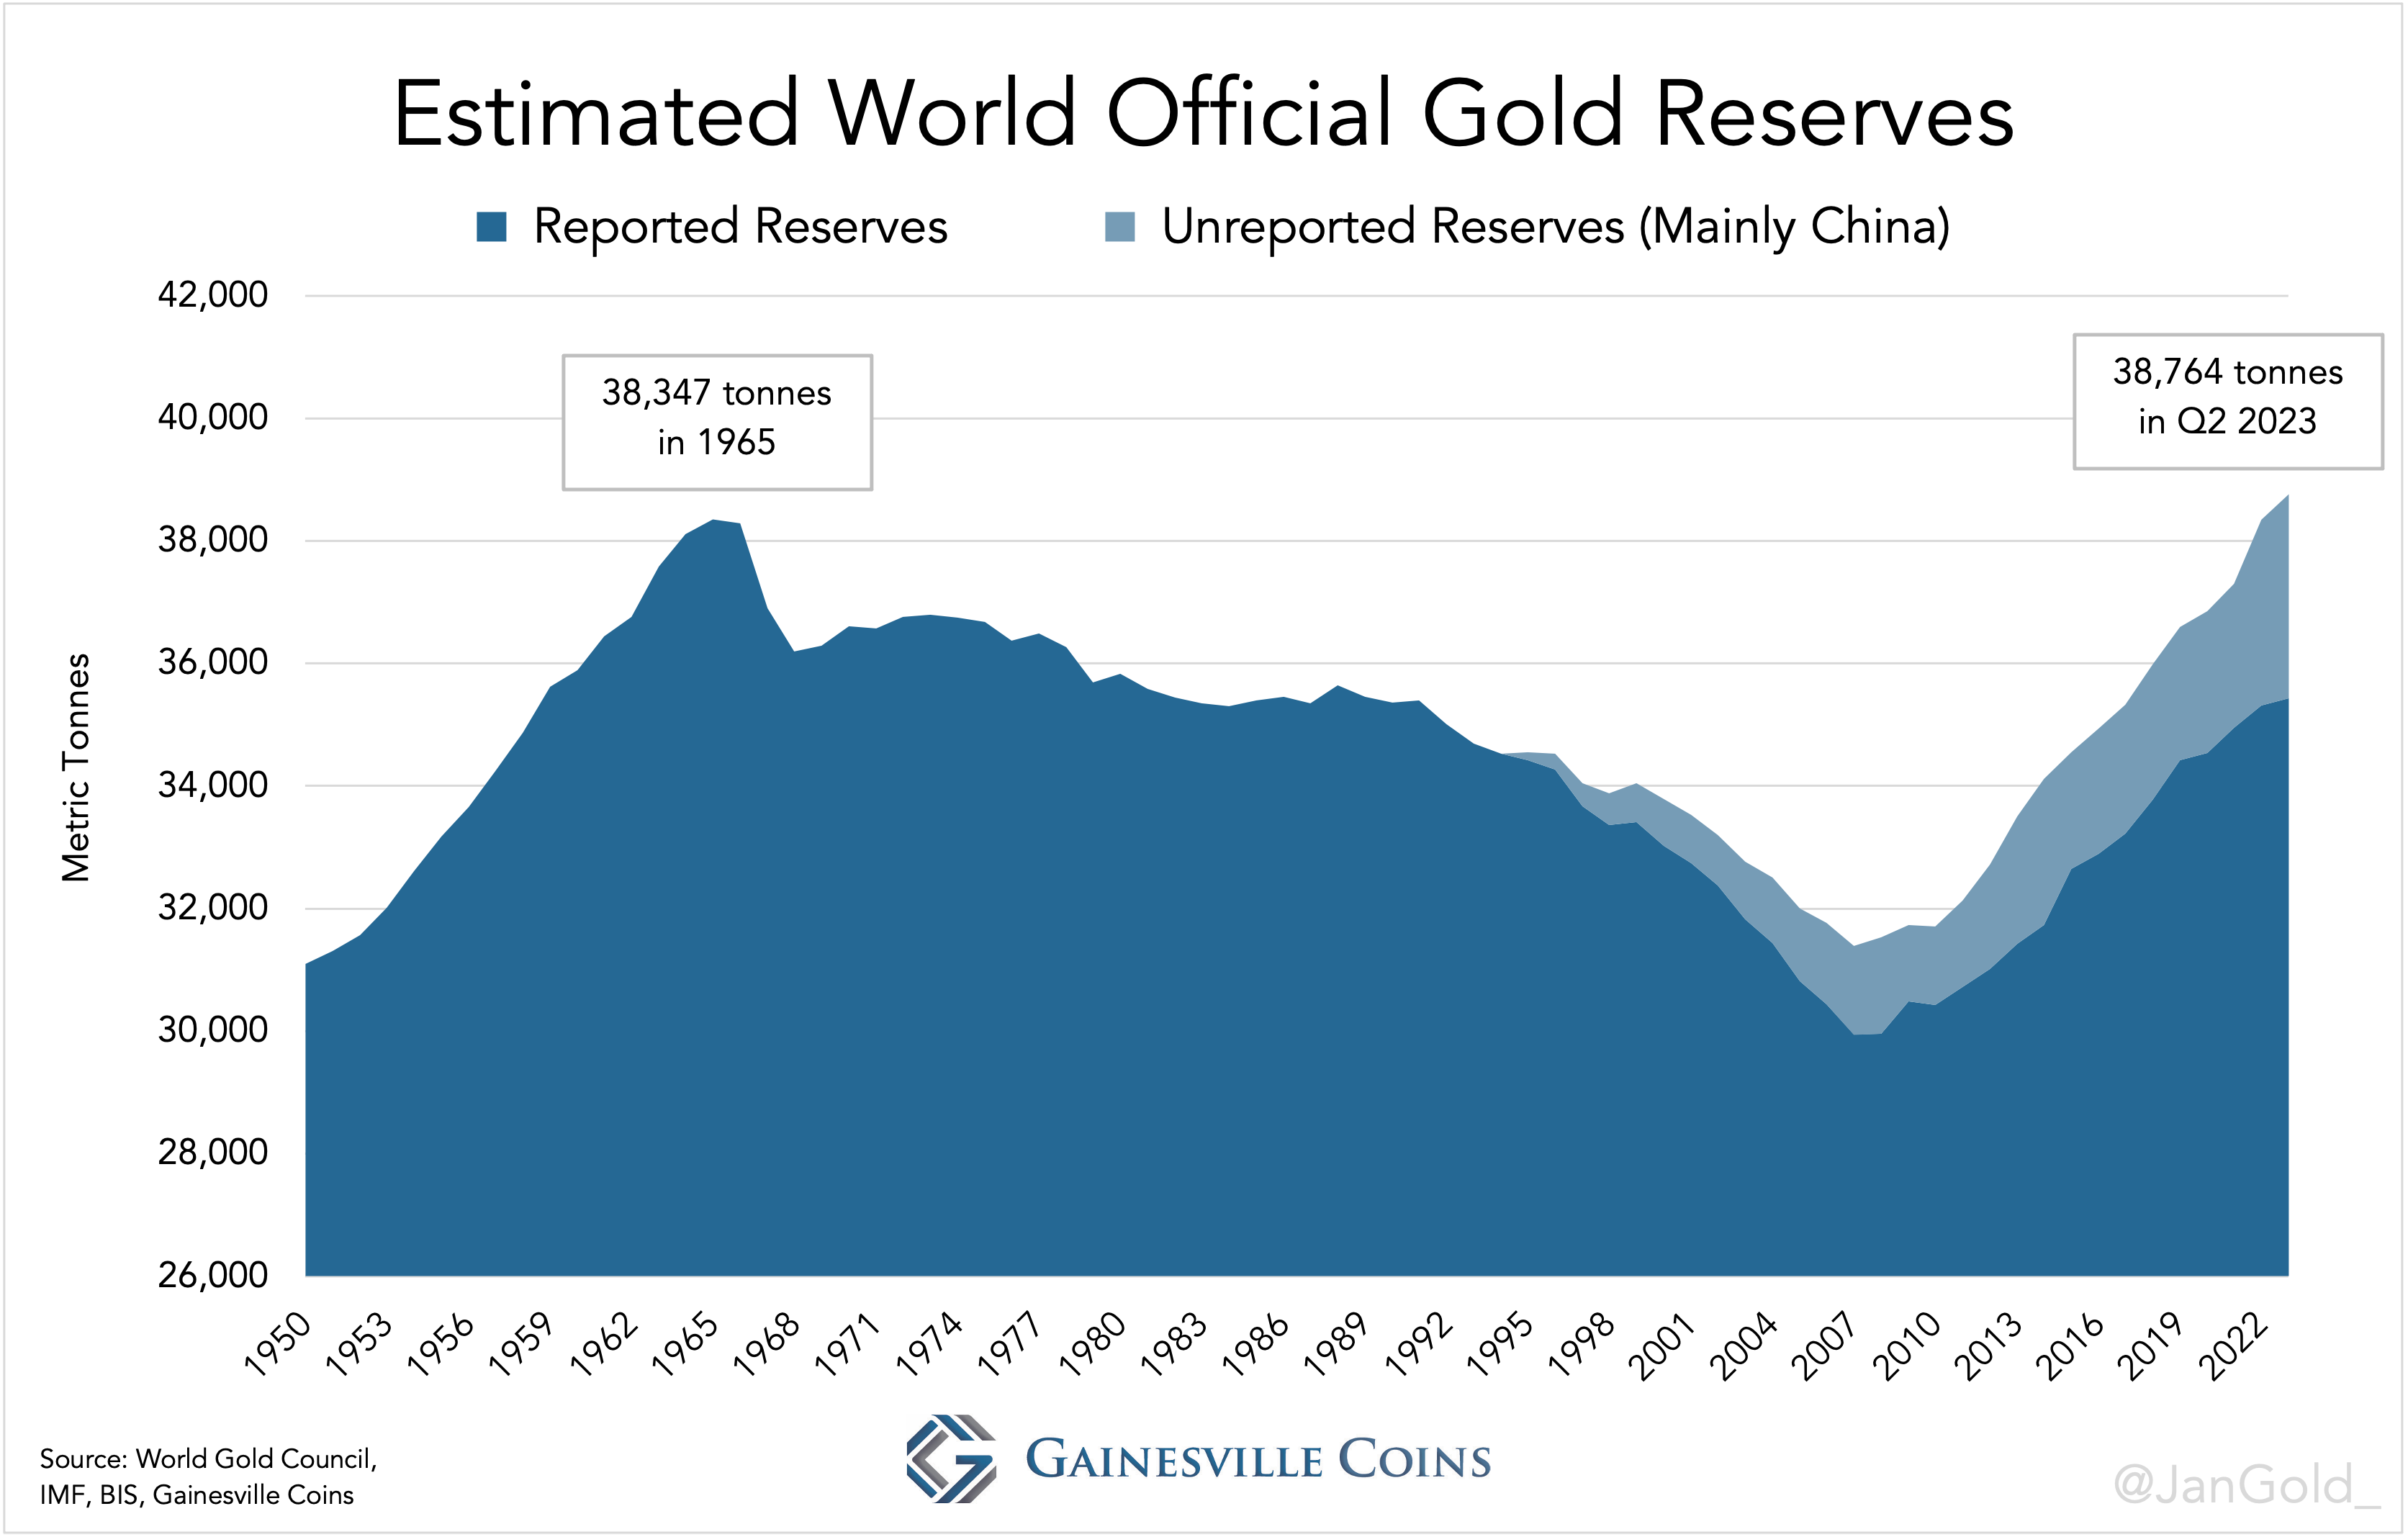 Estimated World Gold Reserve Holdings 2Q23